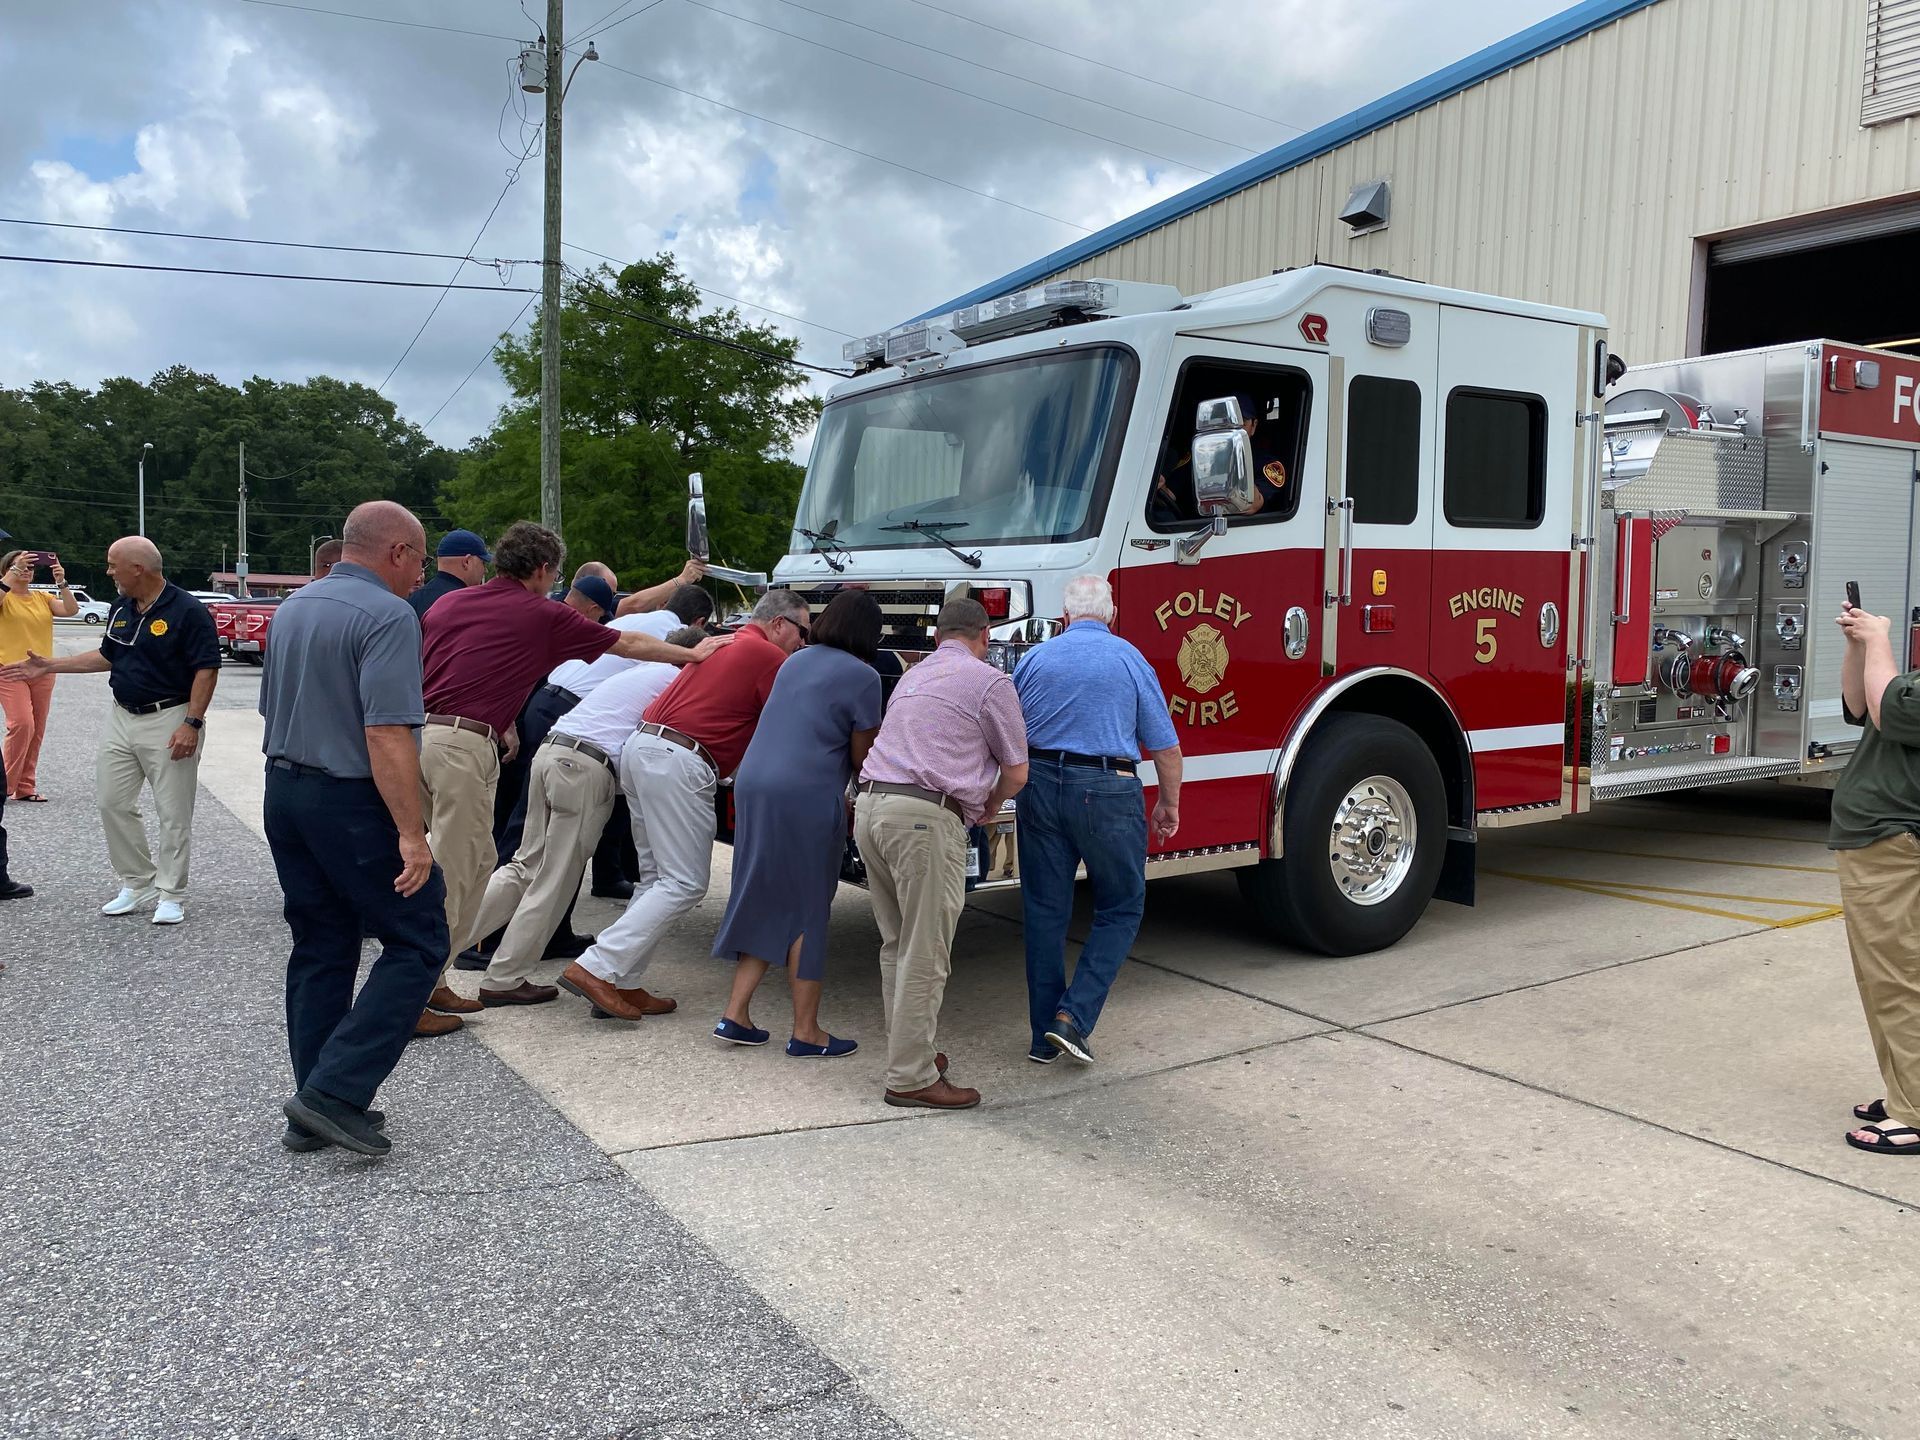 Foley Fire Department Ups Capacity with New Truck